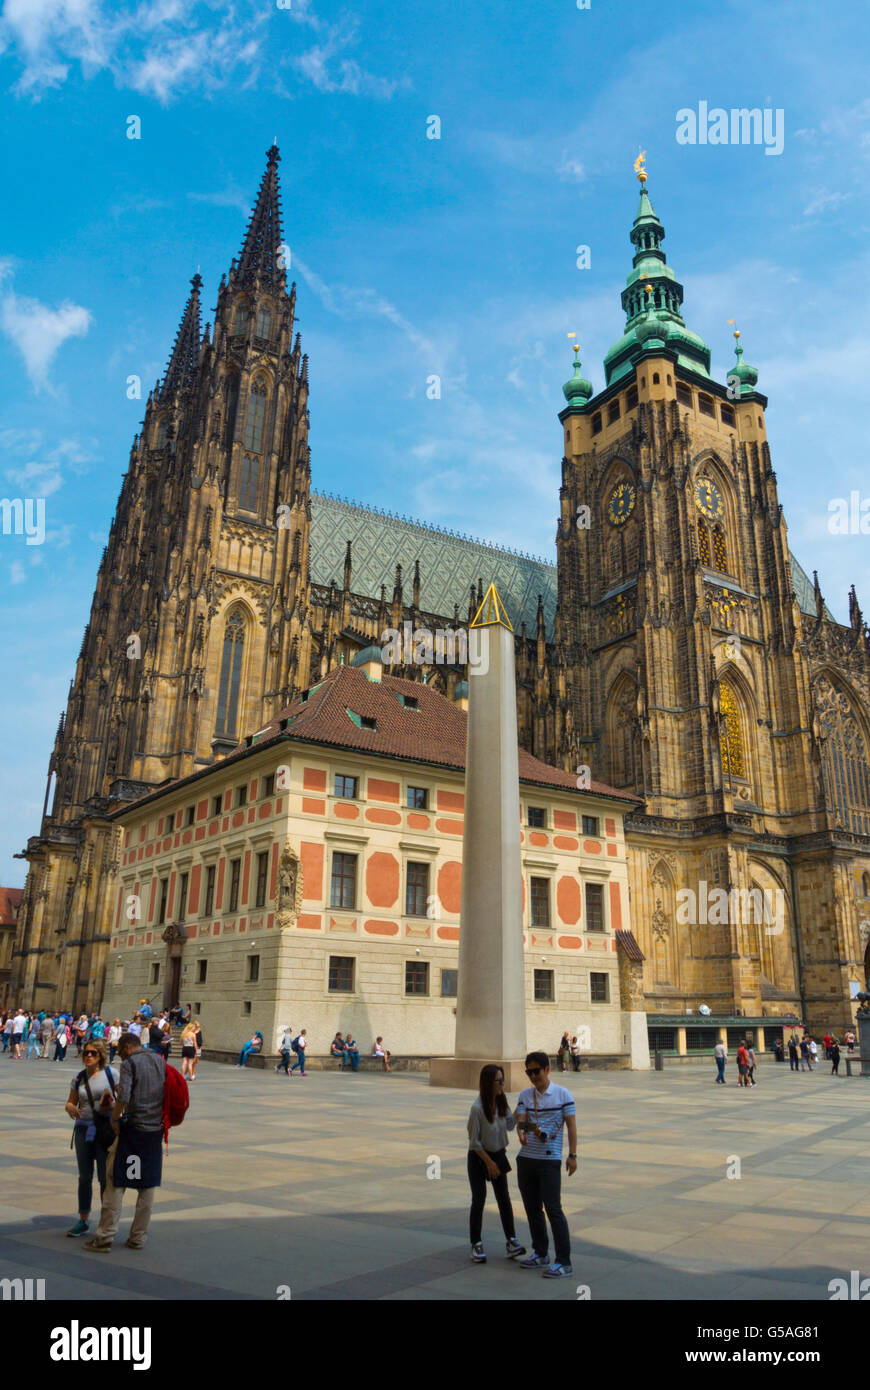 St Vitus Cathedral, 3rd courtyard, Hrad, castle Hradcany, Prague, Czech Republic, Europe Stock Photo